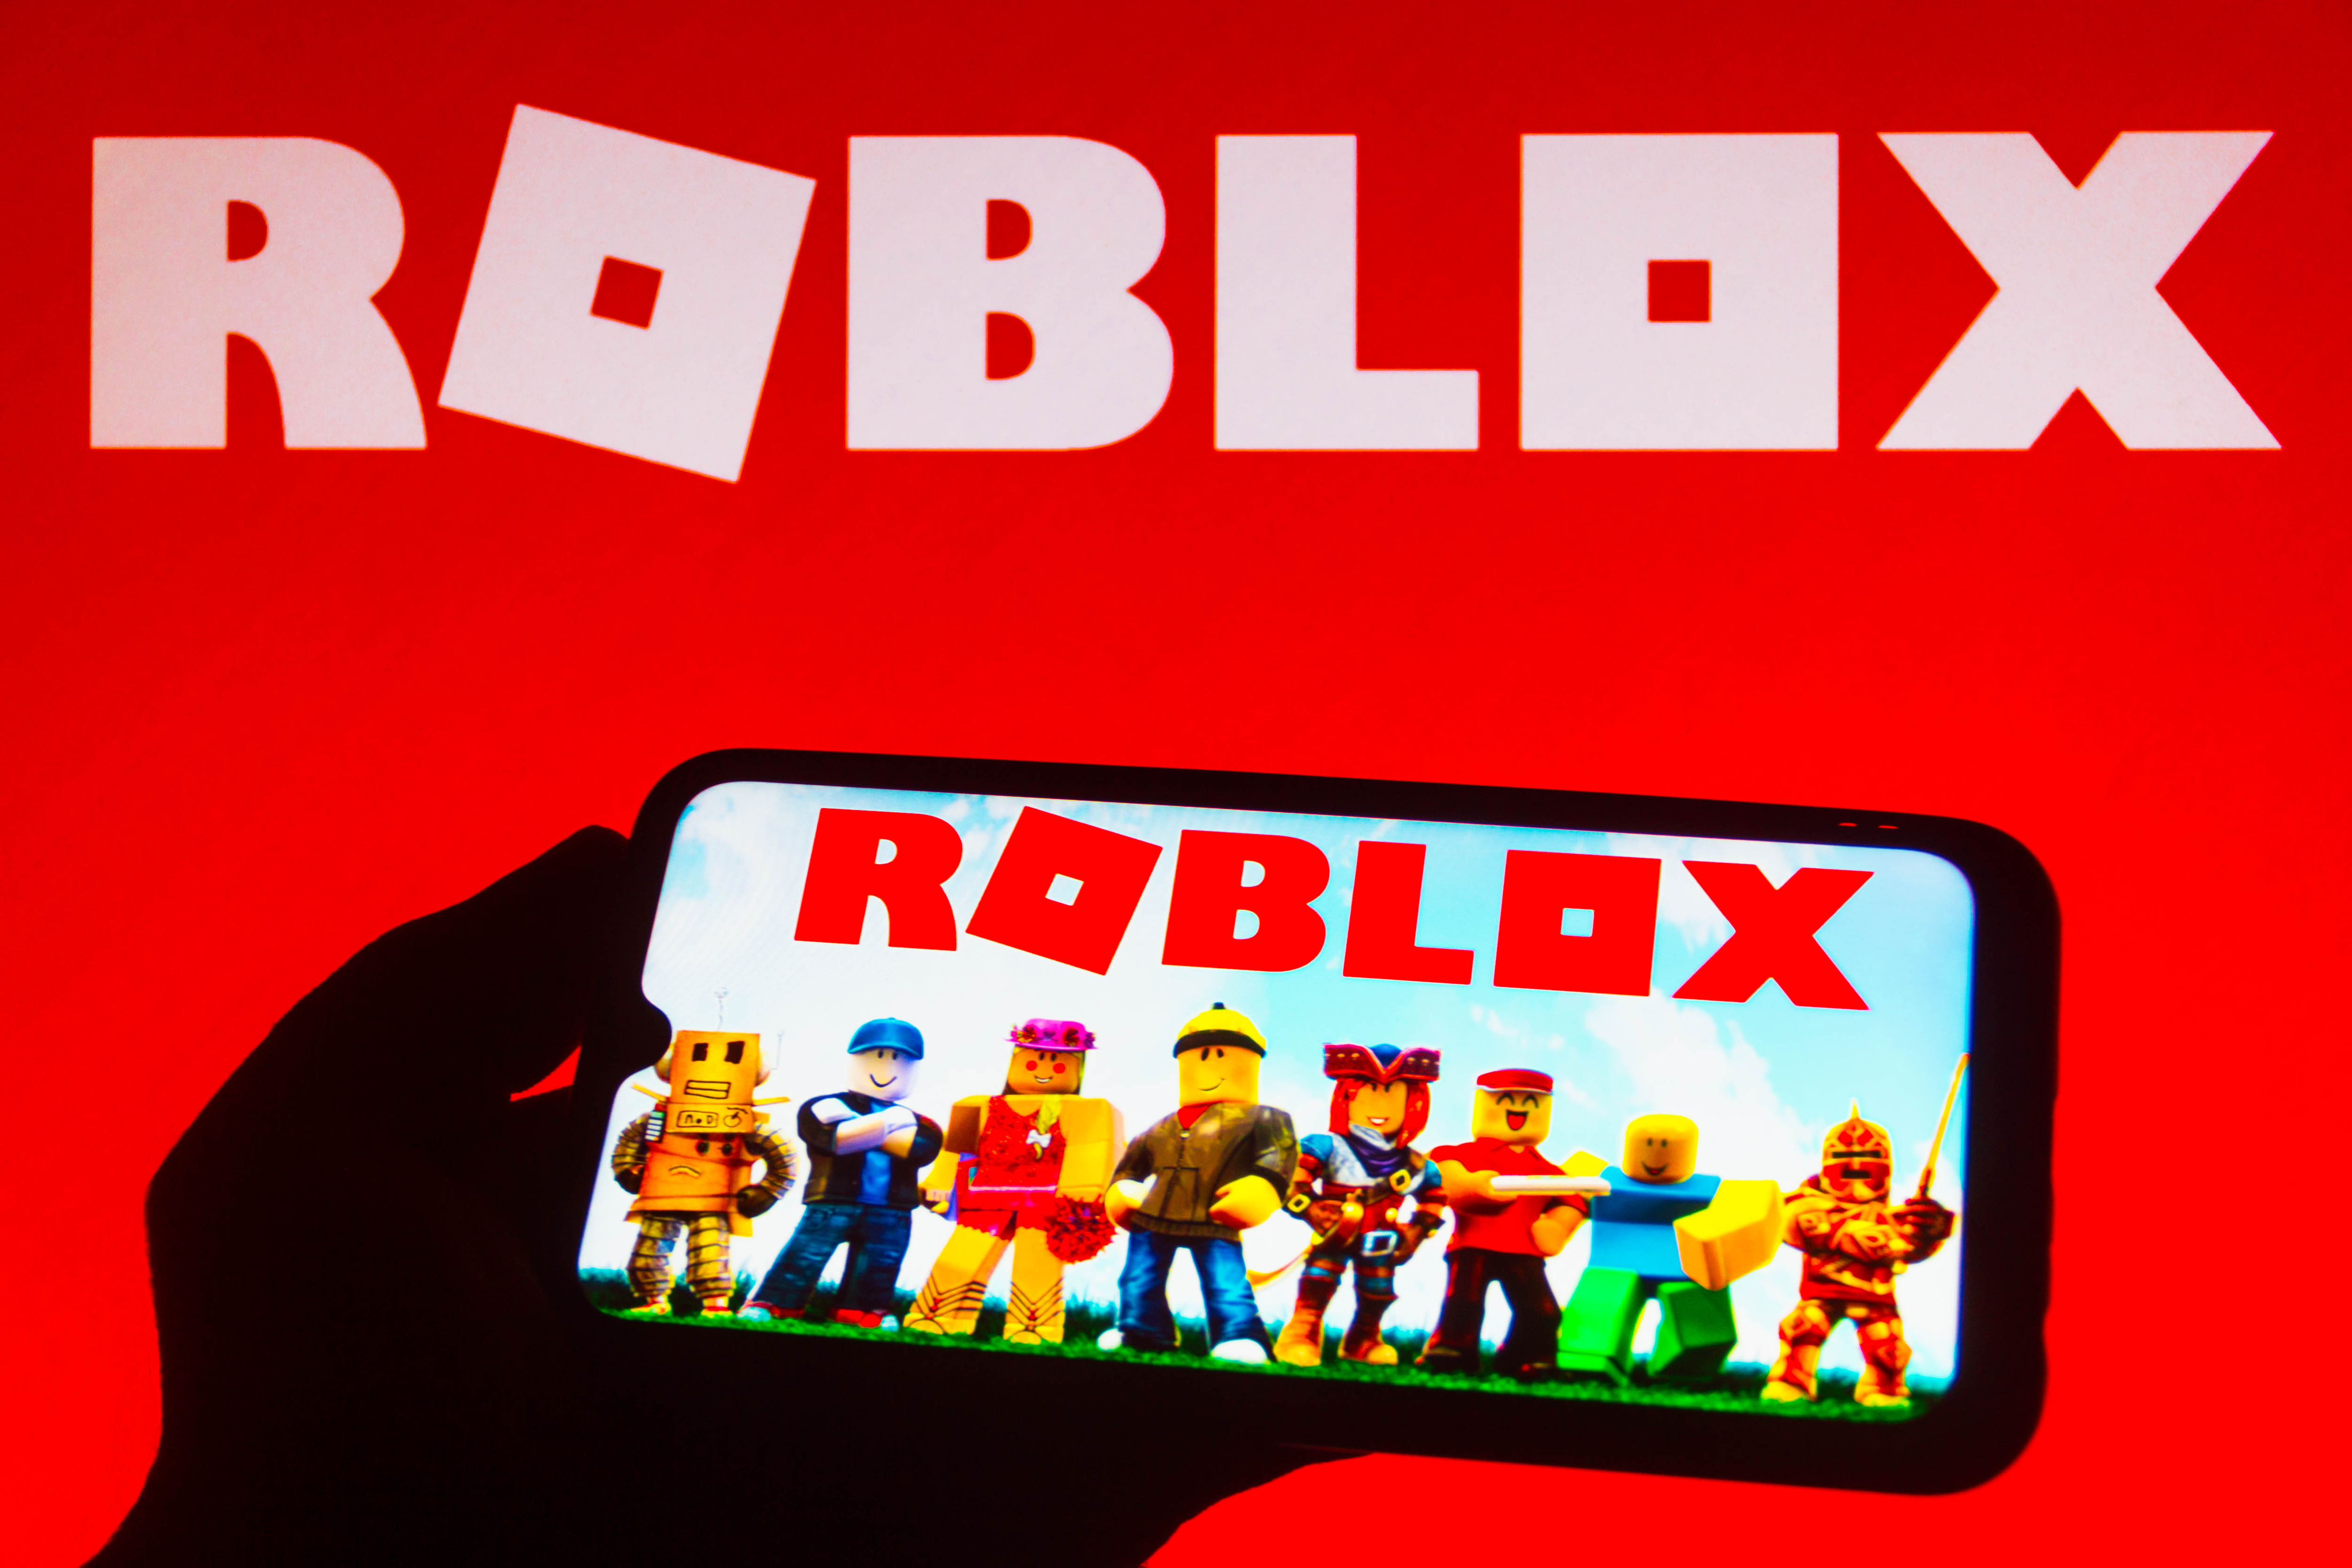 𝐏𝐈𝐍𝐊𝐋𝐄𝐀𝐅 𝐔𝐍𝐎𝐅𝐅𝐈𝐂𝐈𝐀𝐋, ROBLOX NEWS: Roblox is down because  it just got release chipotle burritos and it was too strong and it crash  roblox and now roblox is down